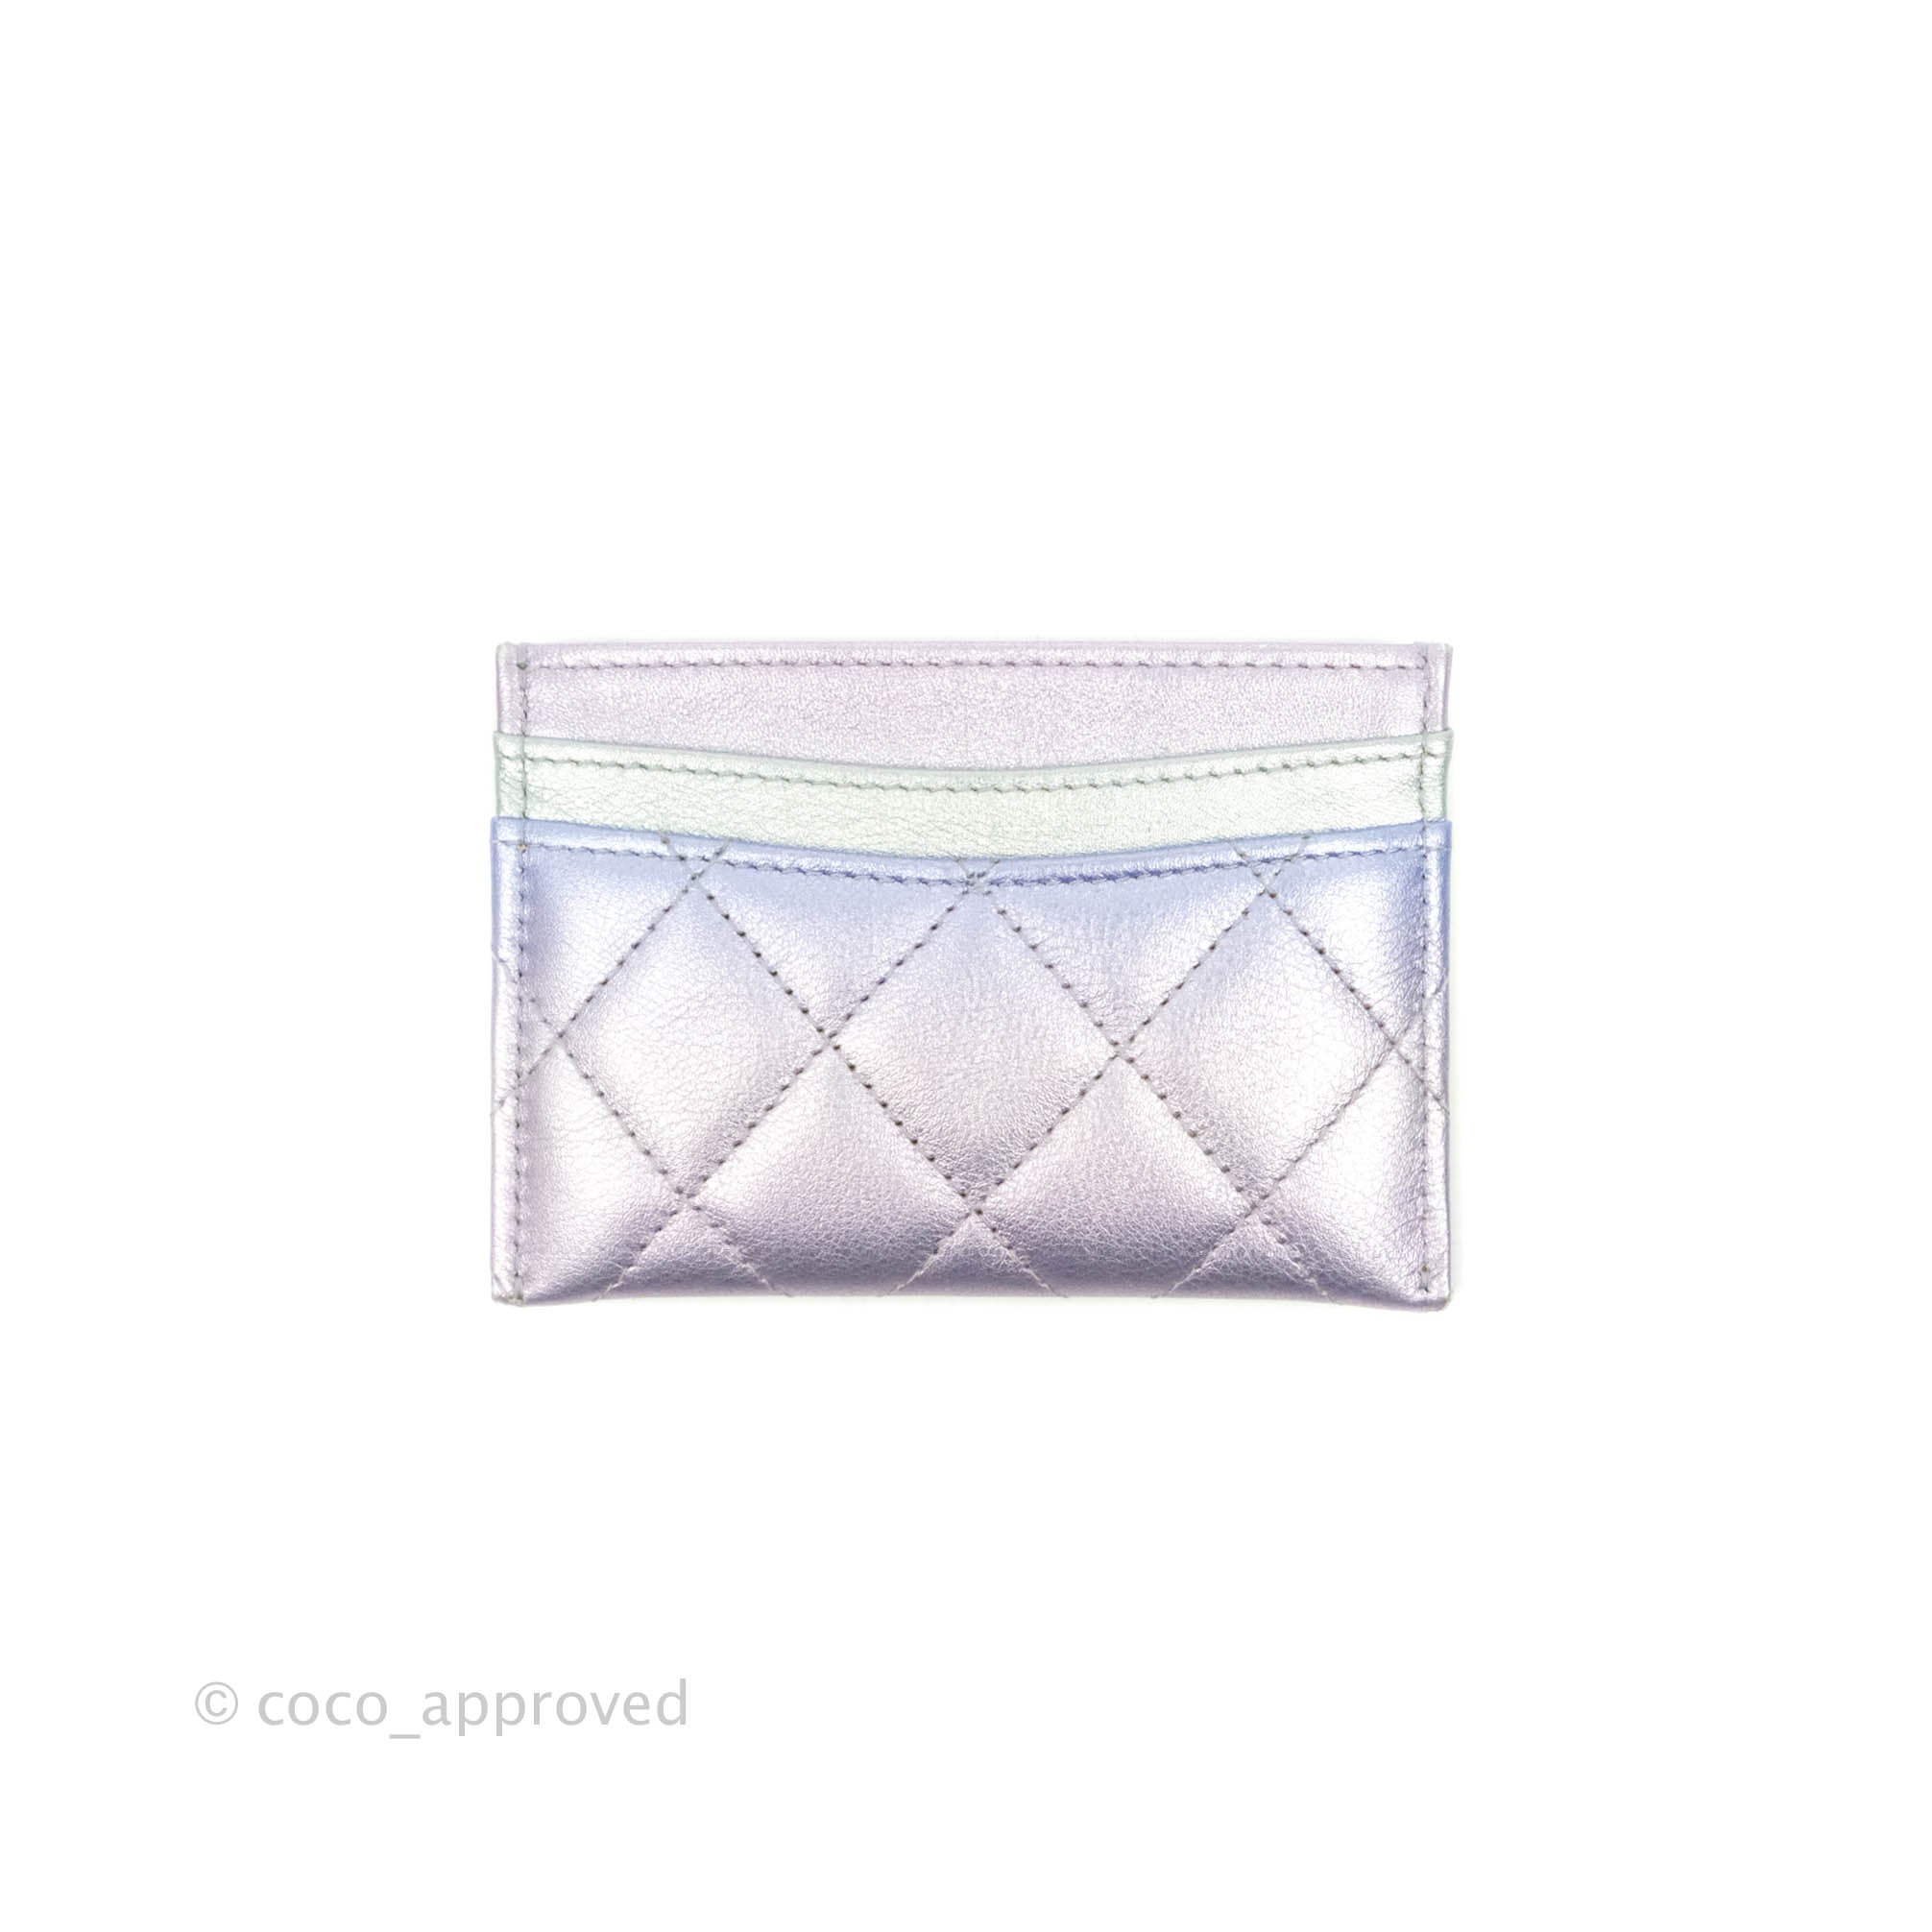 Chanel Reissue, Purple Iridescent with Rainbow Hardware, New in